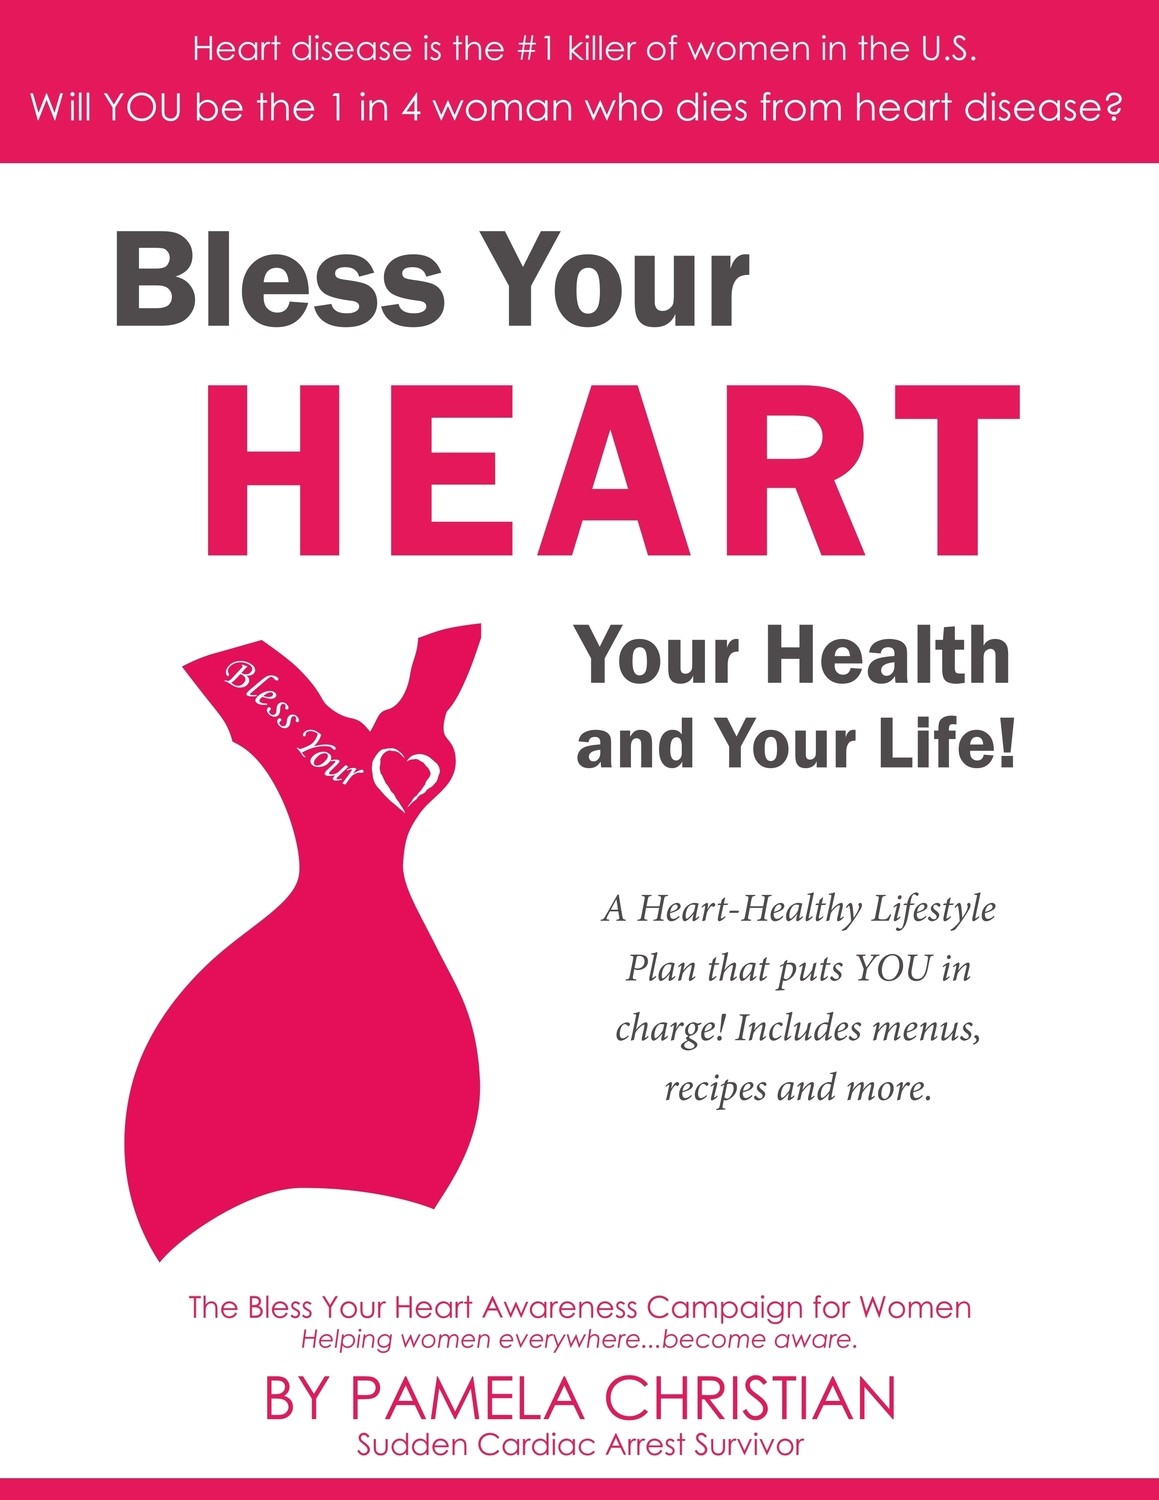 Bless Your Heart, Your Health and Your Life!